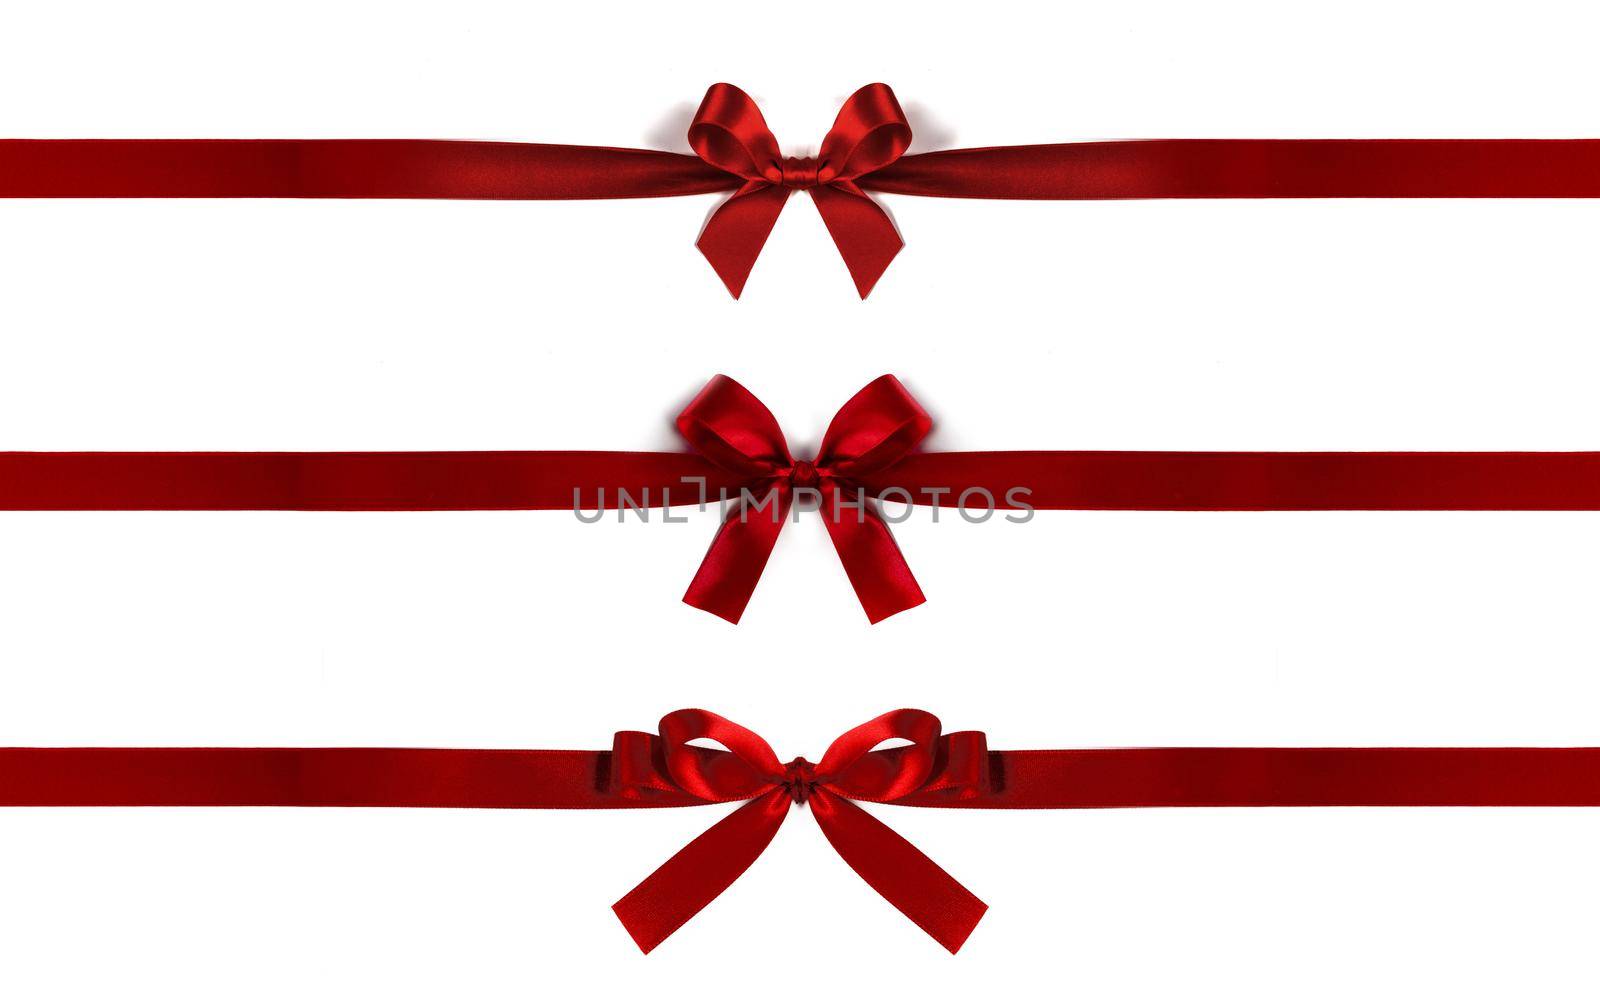 Set of red satin bow isolated on white background. Christmas holiday gift concept